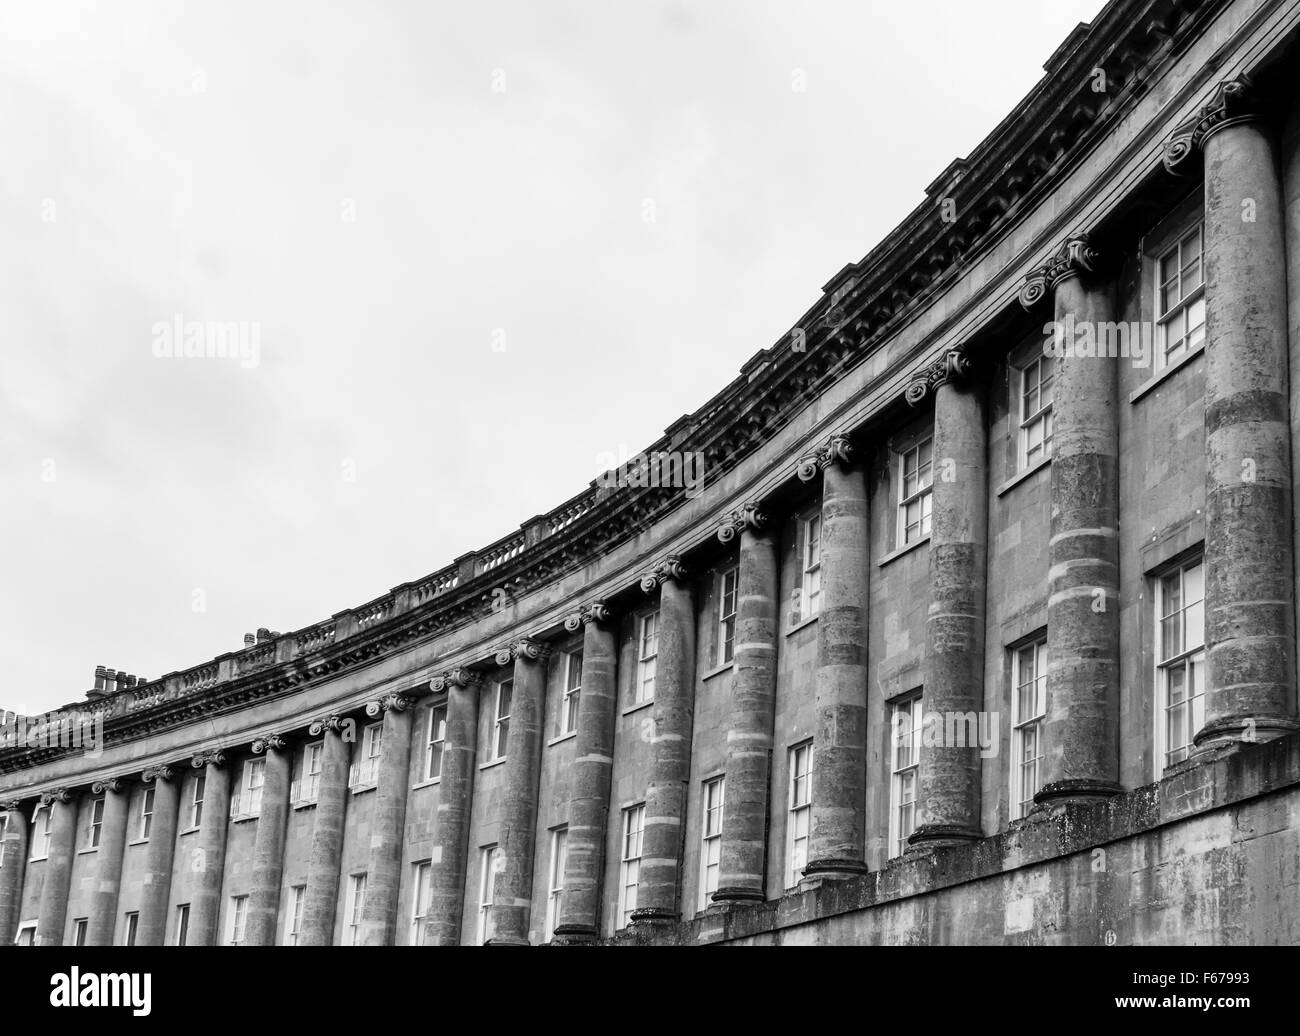 Royal Crescent, Bath in black and white Stock Photo